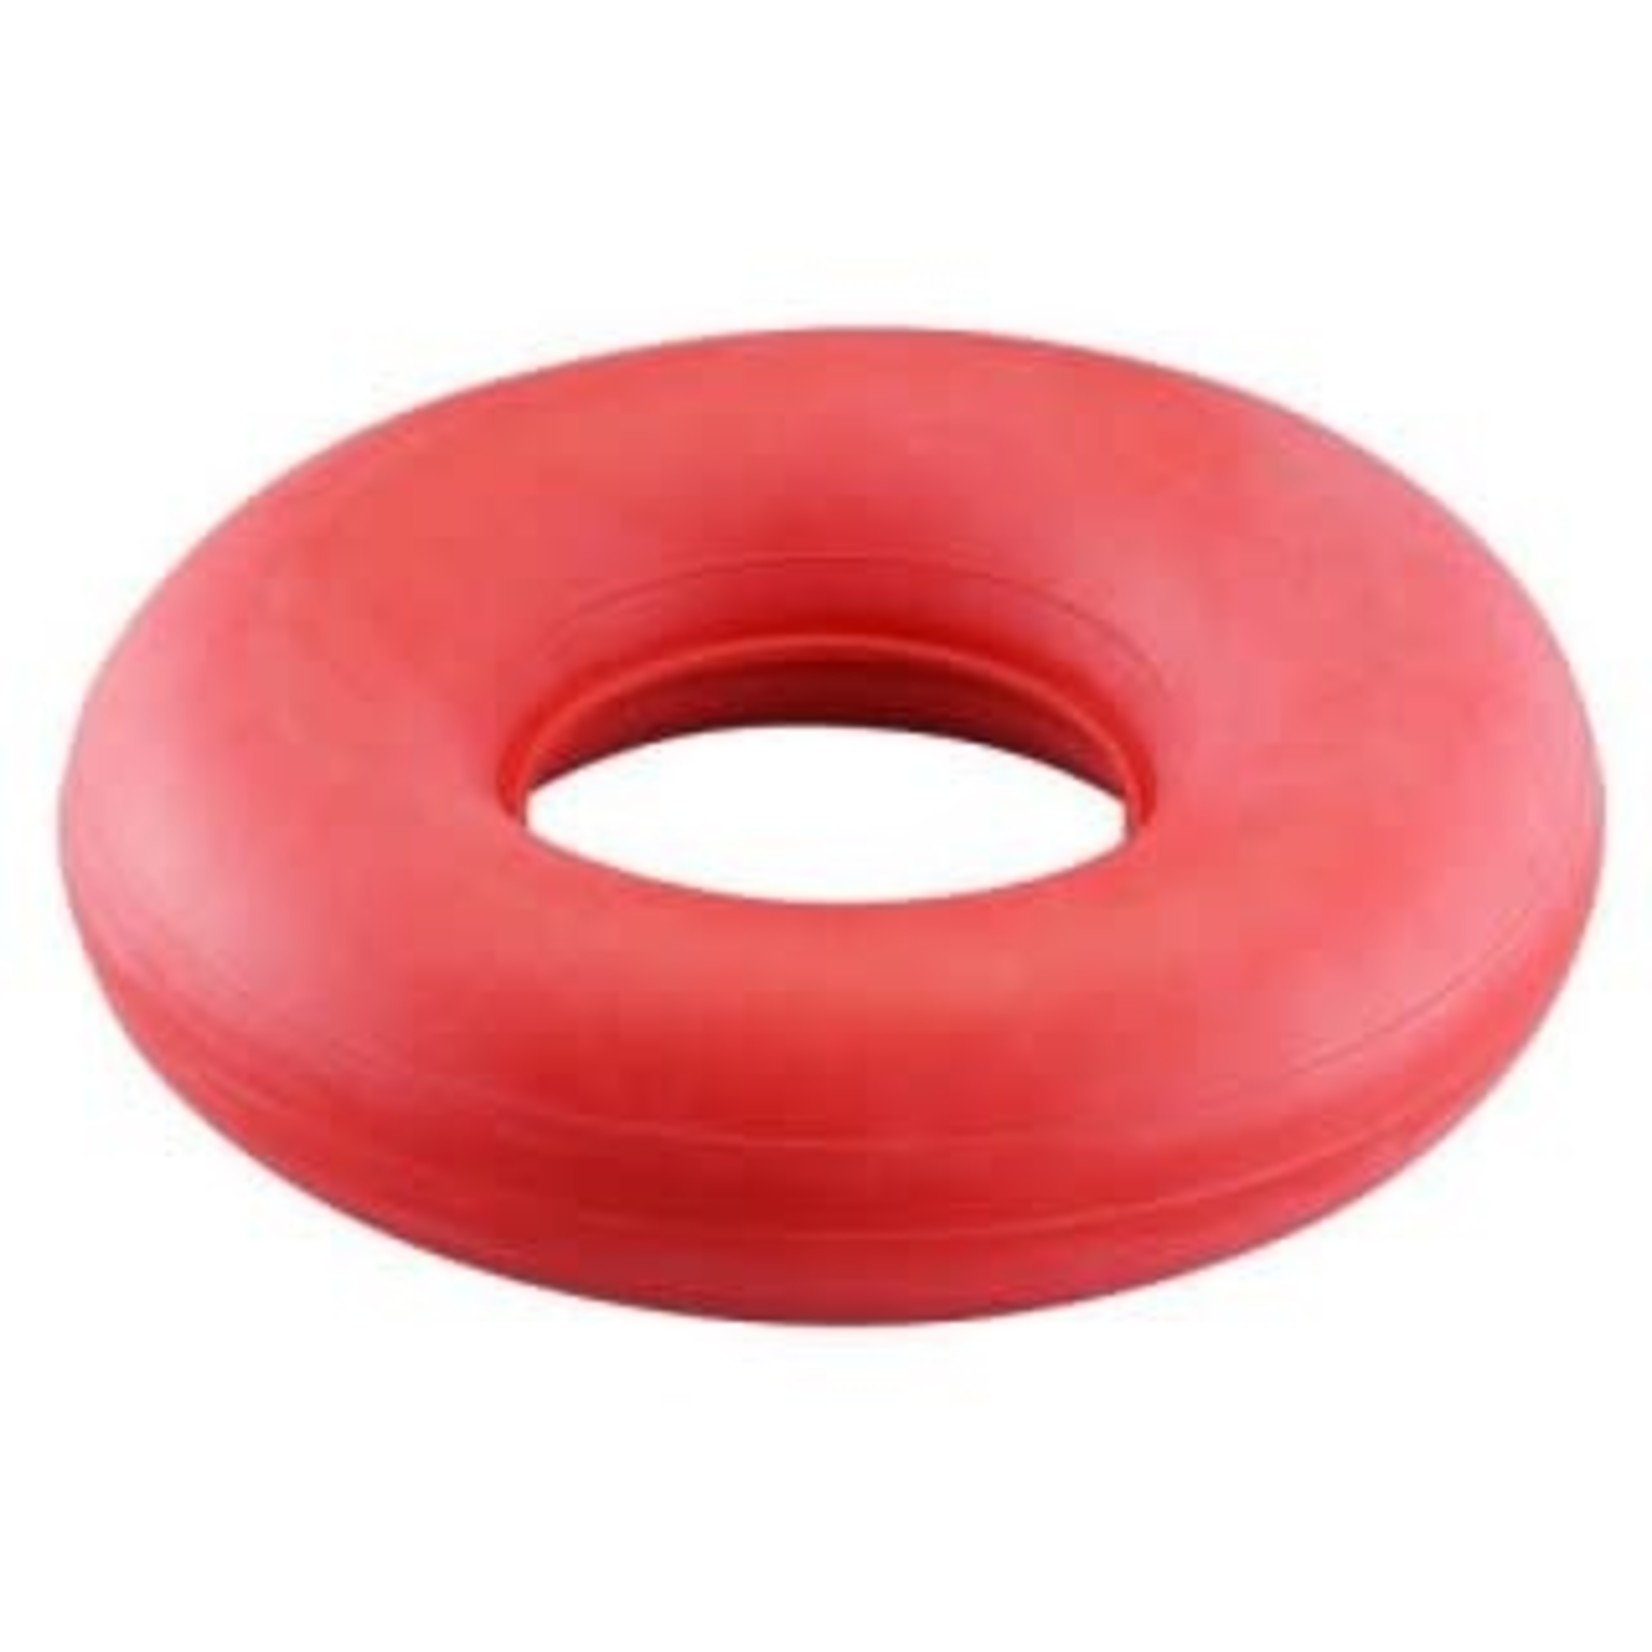 RUBBER CUSHION INFLATABLE 15"